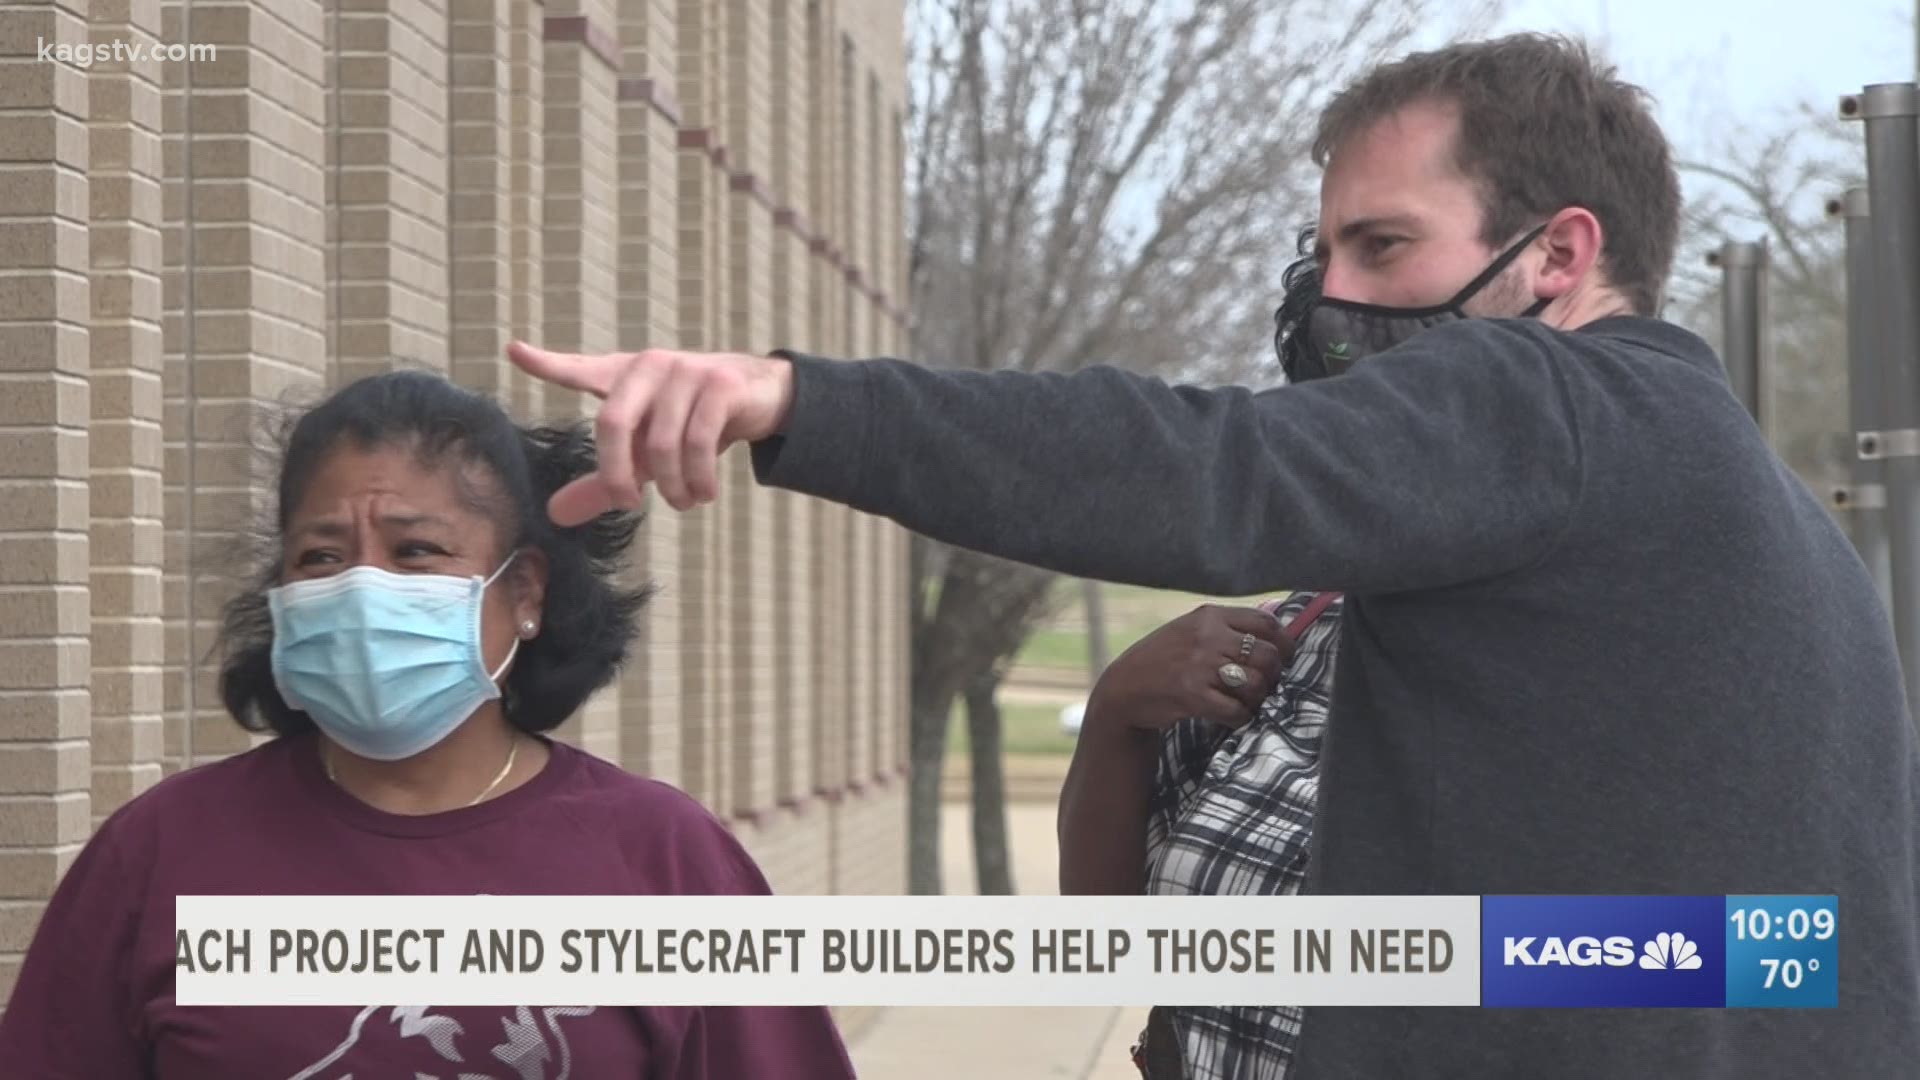 The REACH Project and StyleCraft Builders teamed up to raise money for essential Aggies impacted by the arctic blast.